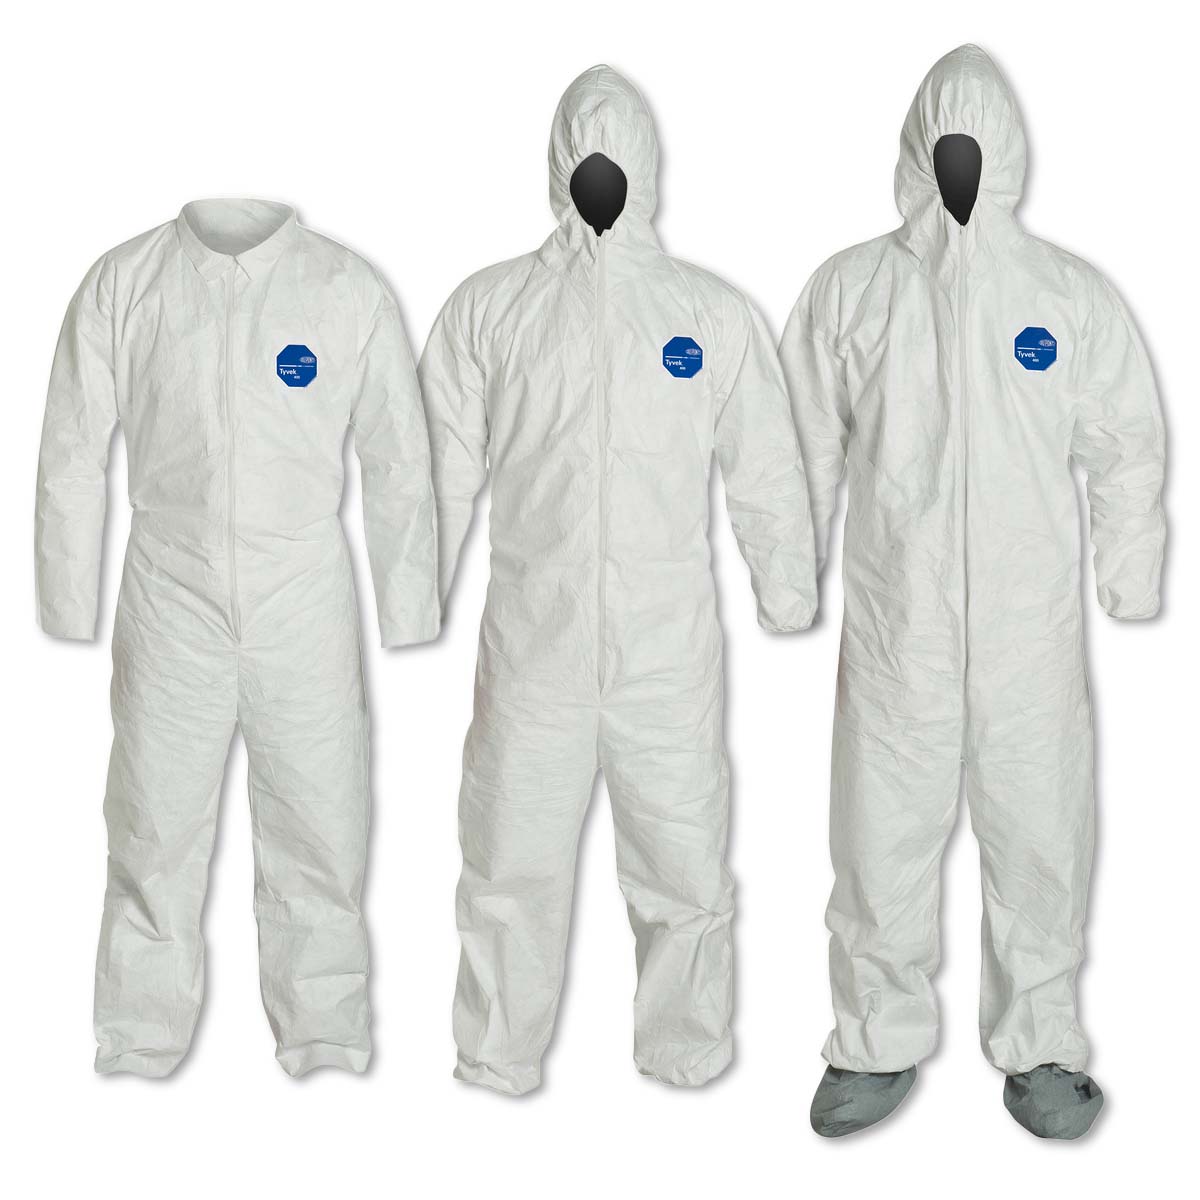 Coveralls, Outerwear and Lab Coats